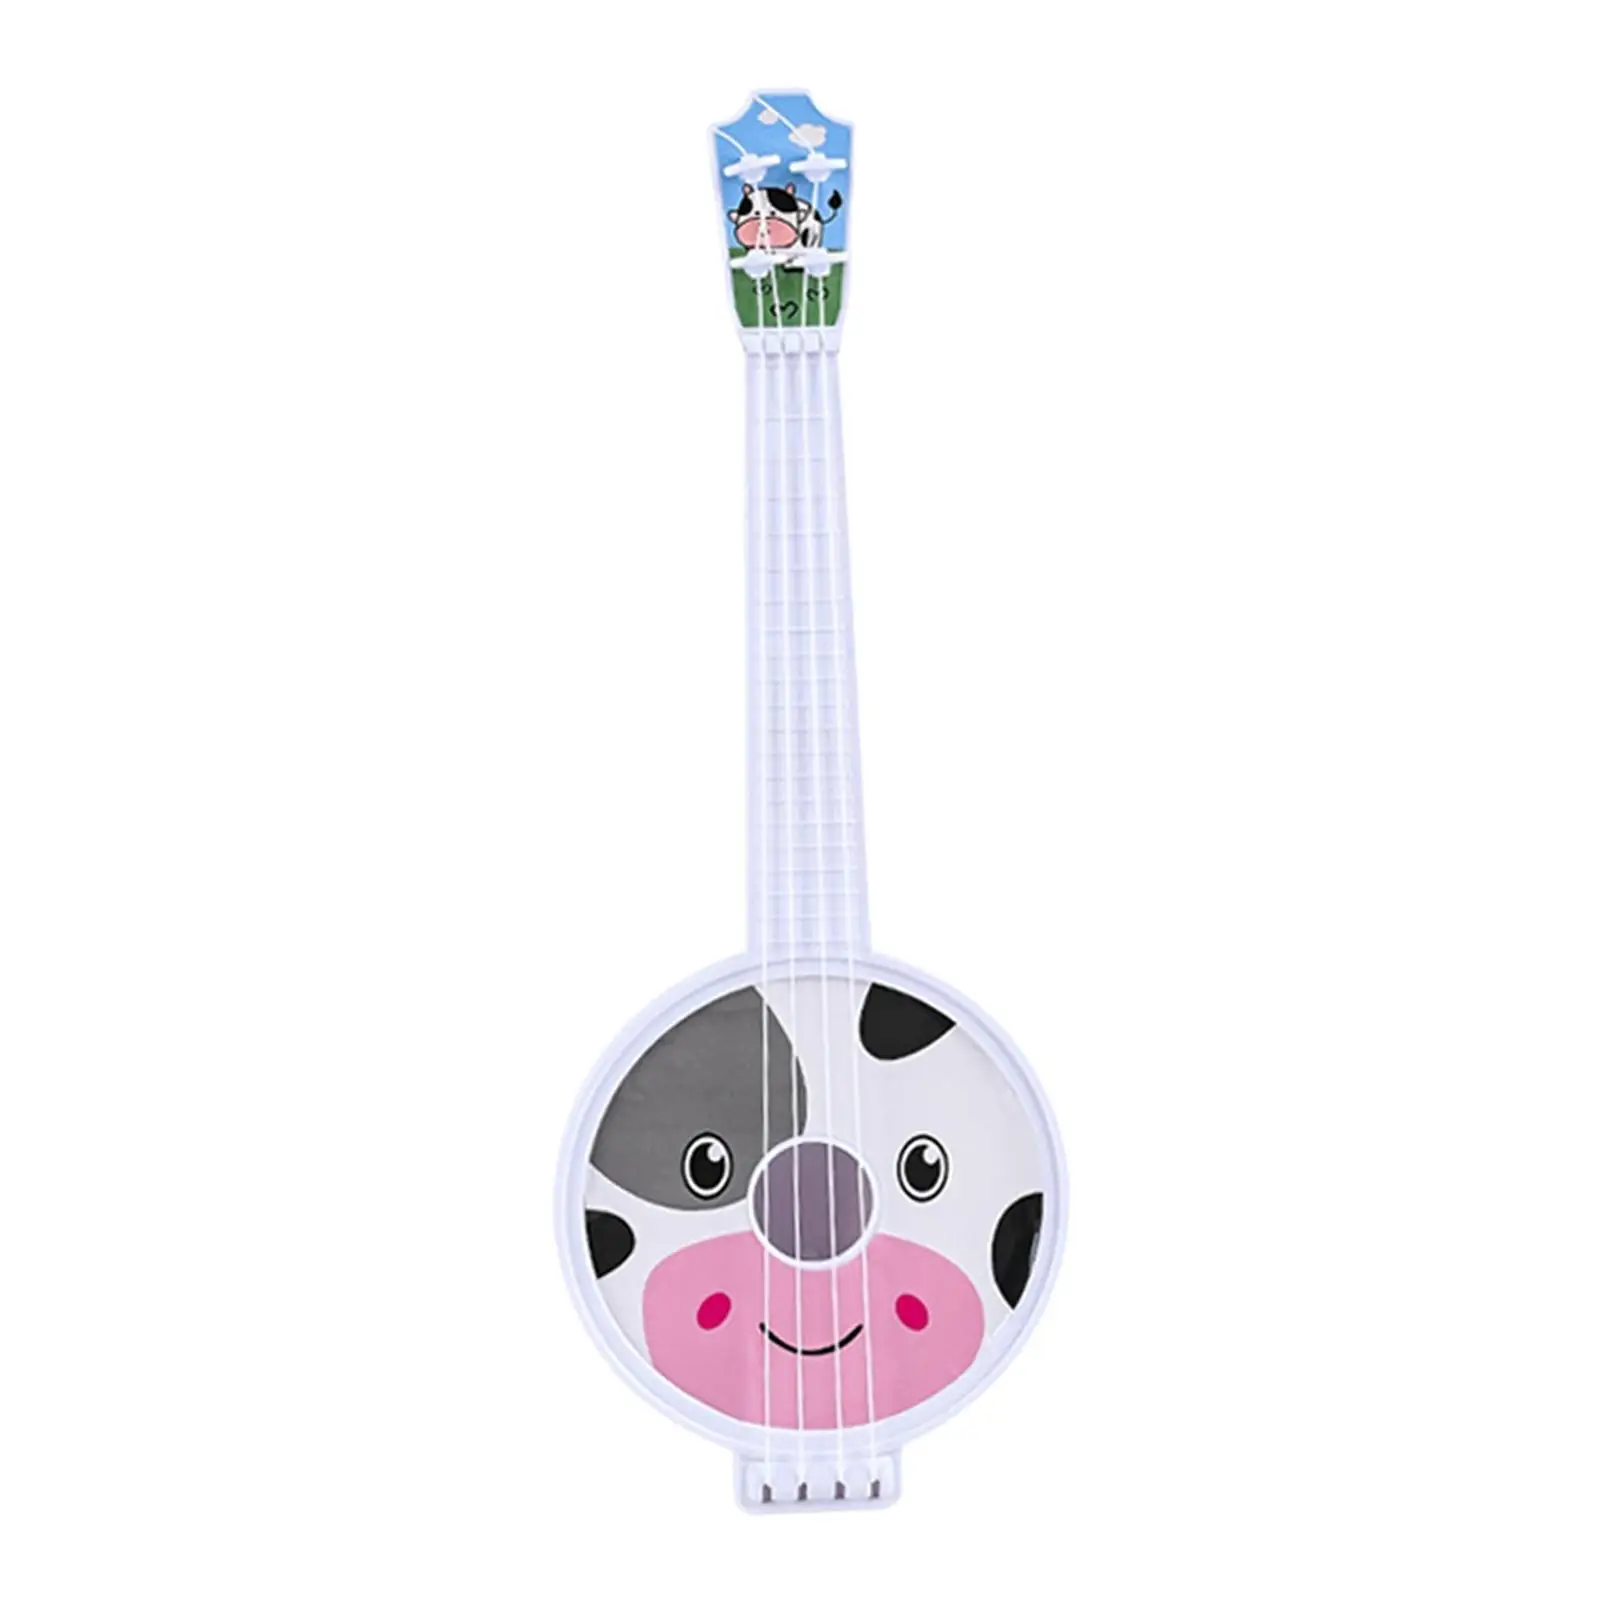  Ukulele Toy Early Educational 4 Strings Play Stringed Instruments Small Guitar for Boys Girls Toddler Baby Beginner Xmas Gifts